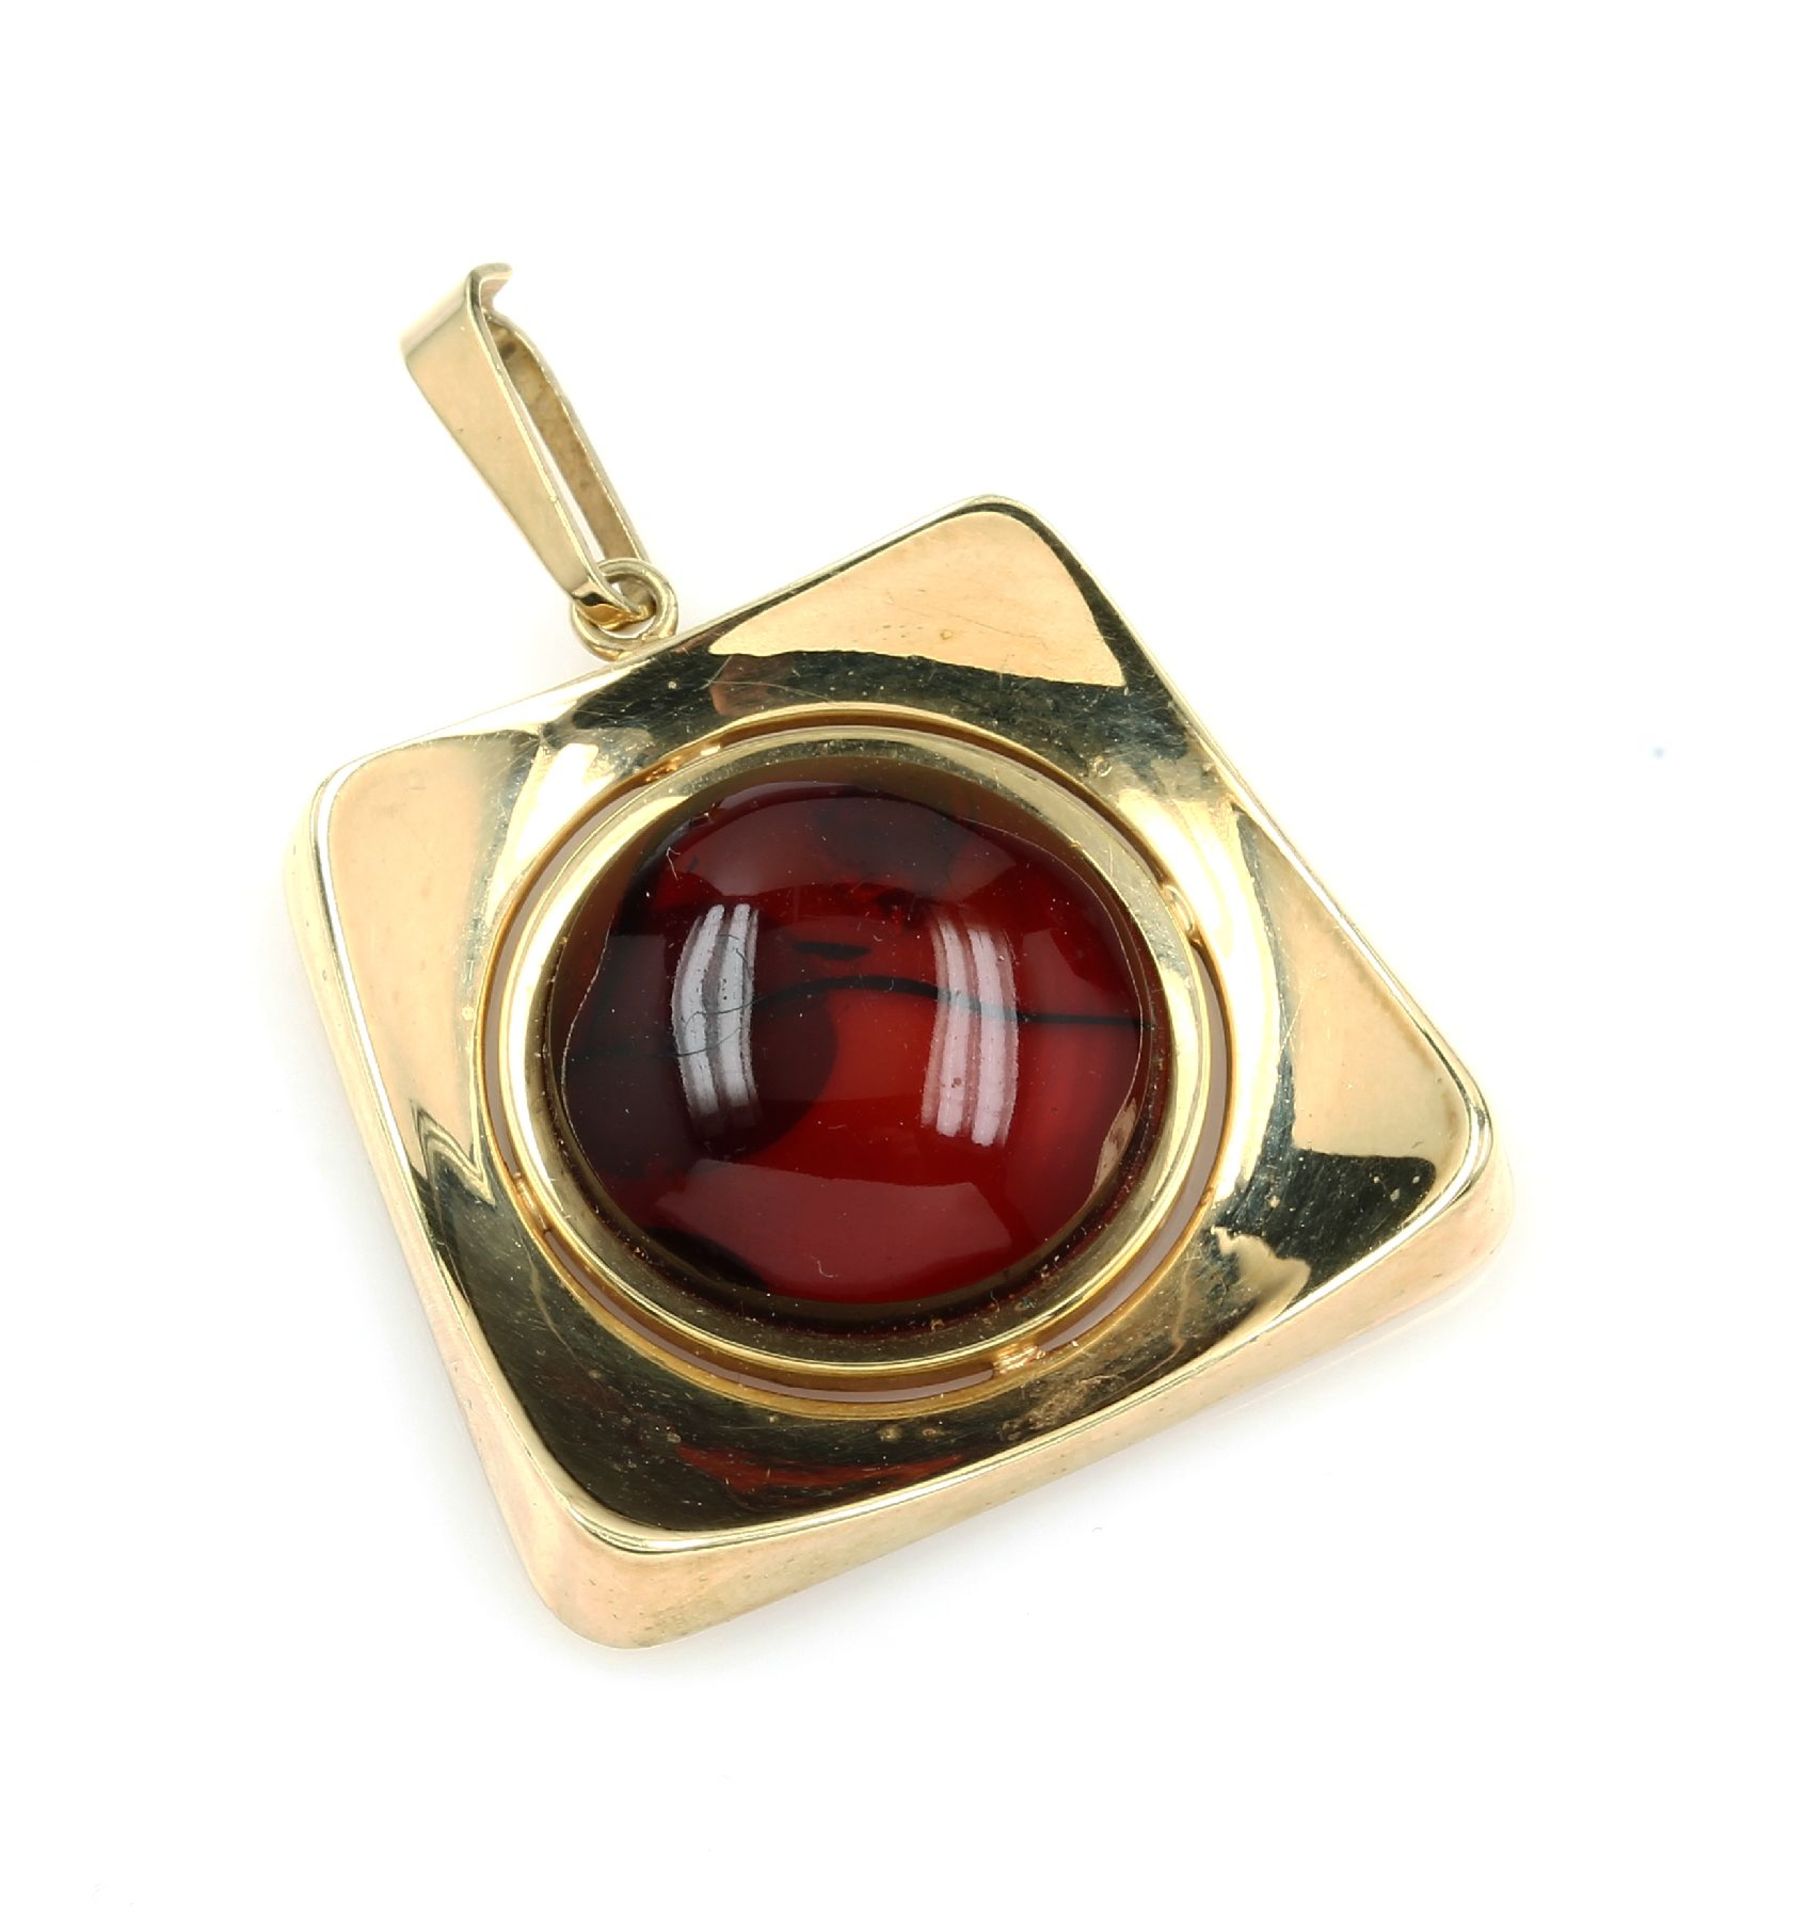 14 kt gold pendant with amber , YG 585/000, approx. 1970s, manufacturer's brand unidentified,